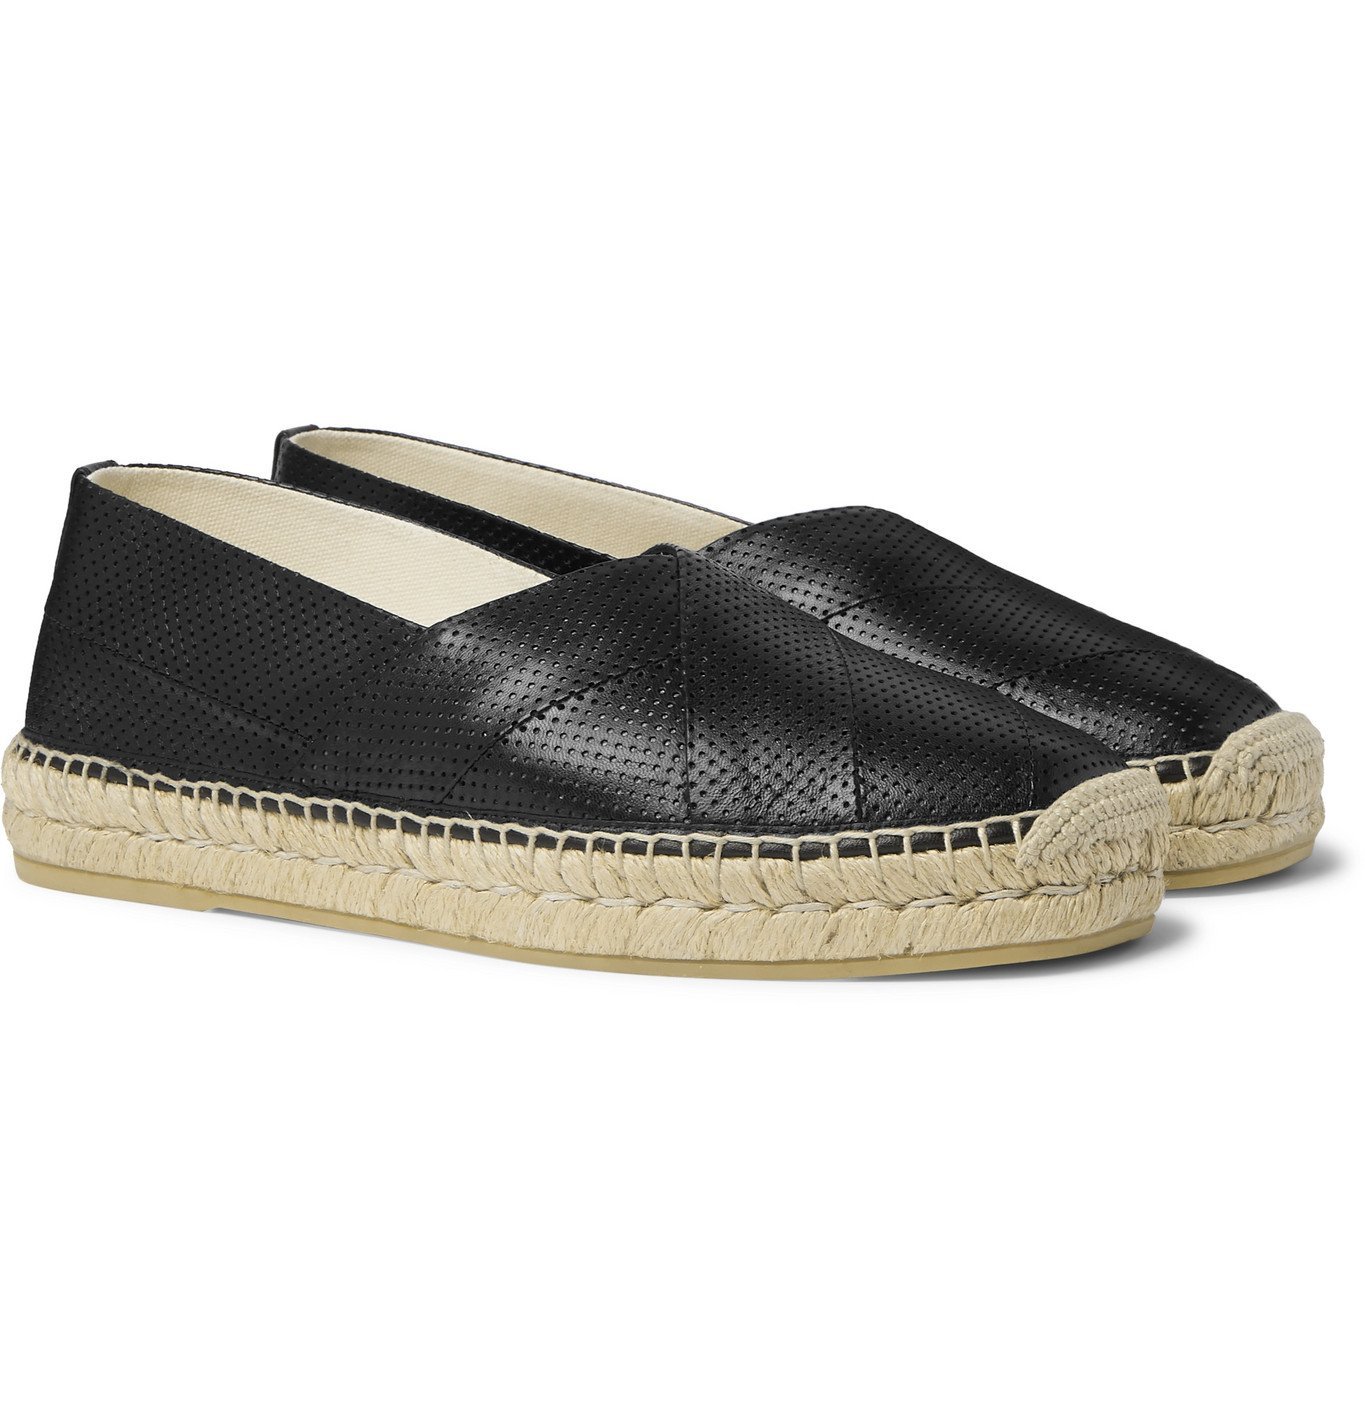 Gucci - Perforated Leather Espadrilles - Black Gucci